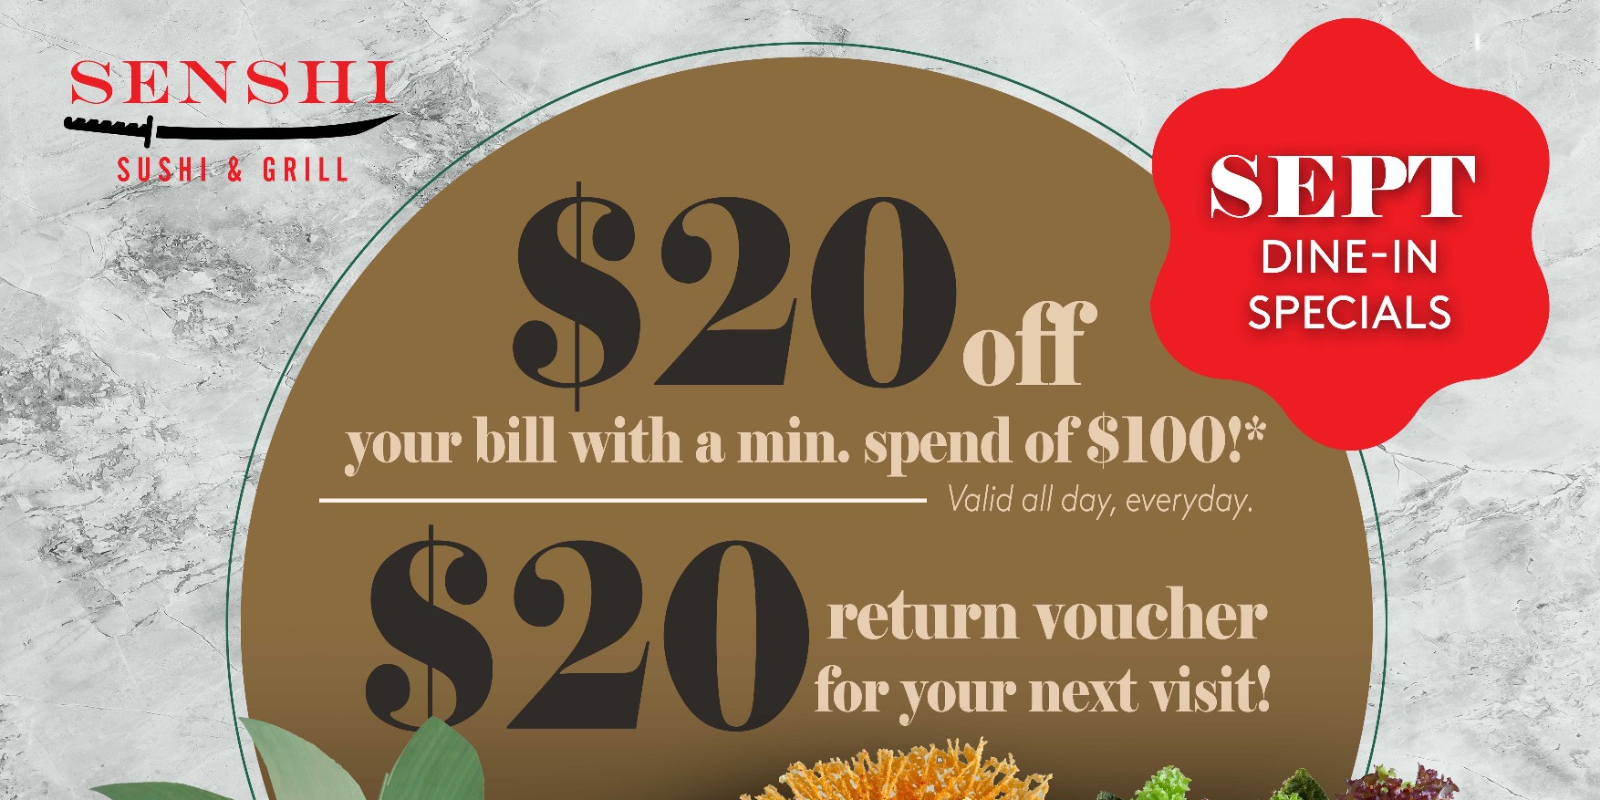 Enjoy $20 off when you dine-in @ SENSHI for the entire month of September plus get a $20 return voucher